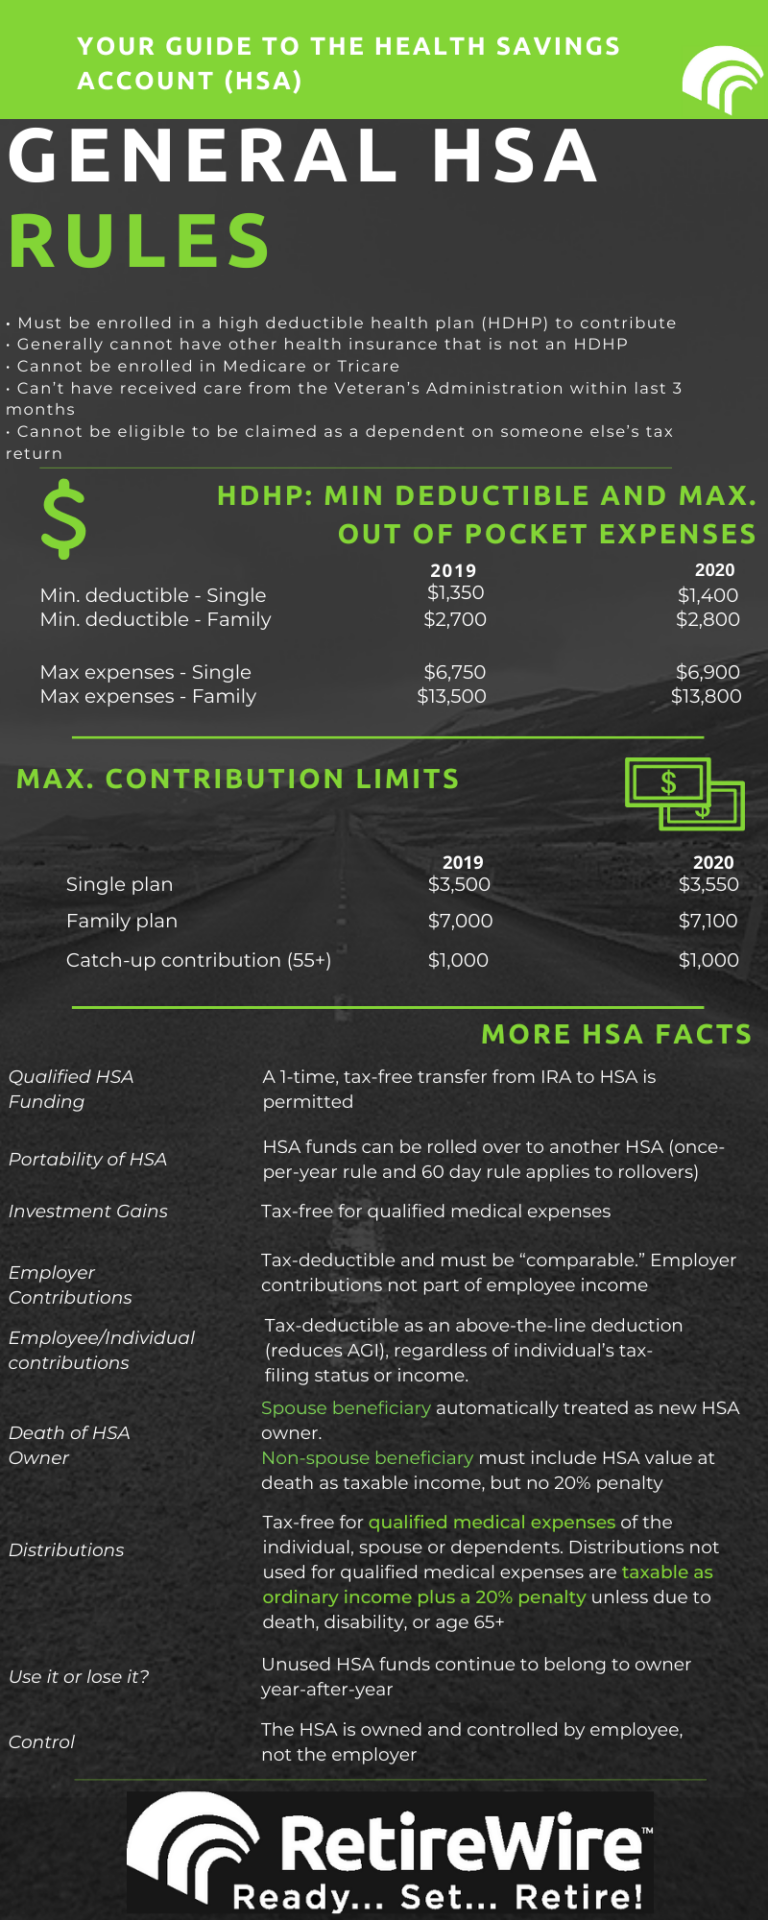 Fund your Health Savings Account with an IRA to HSA rollover RetireWire